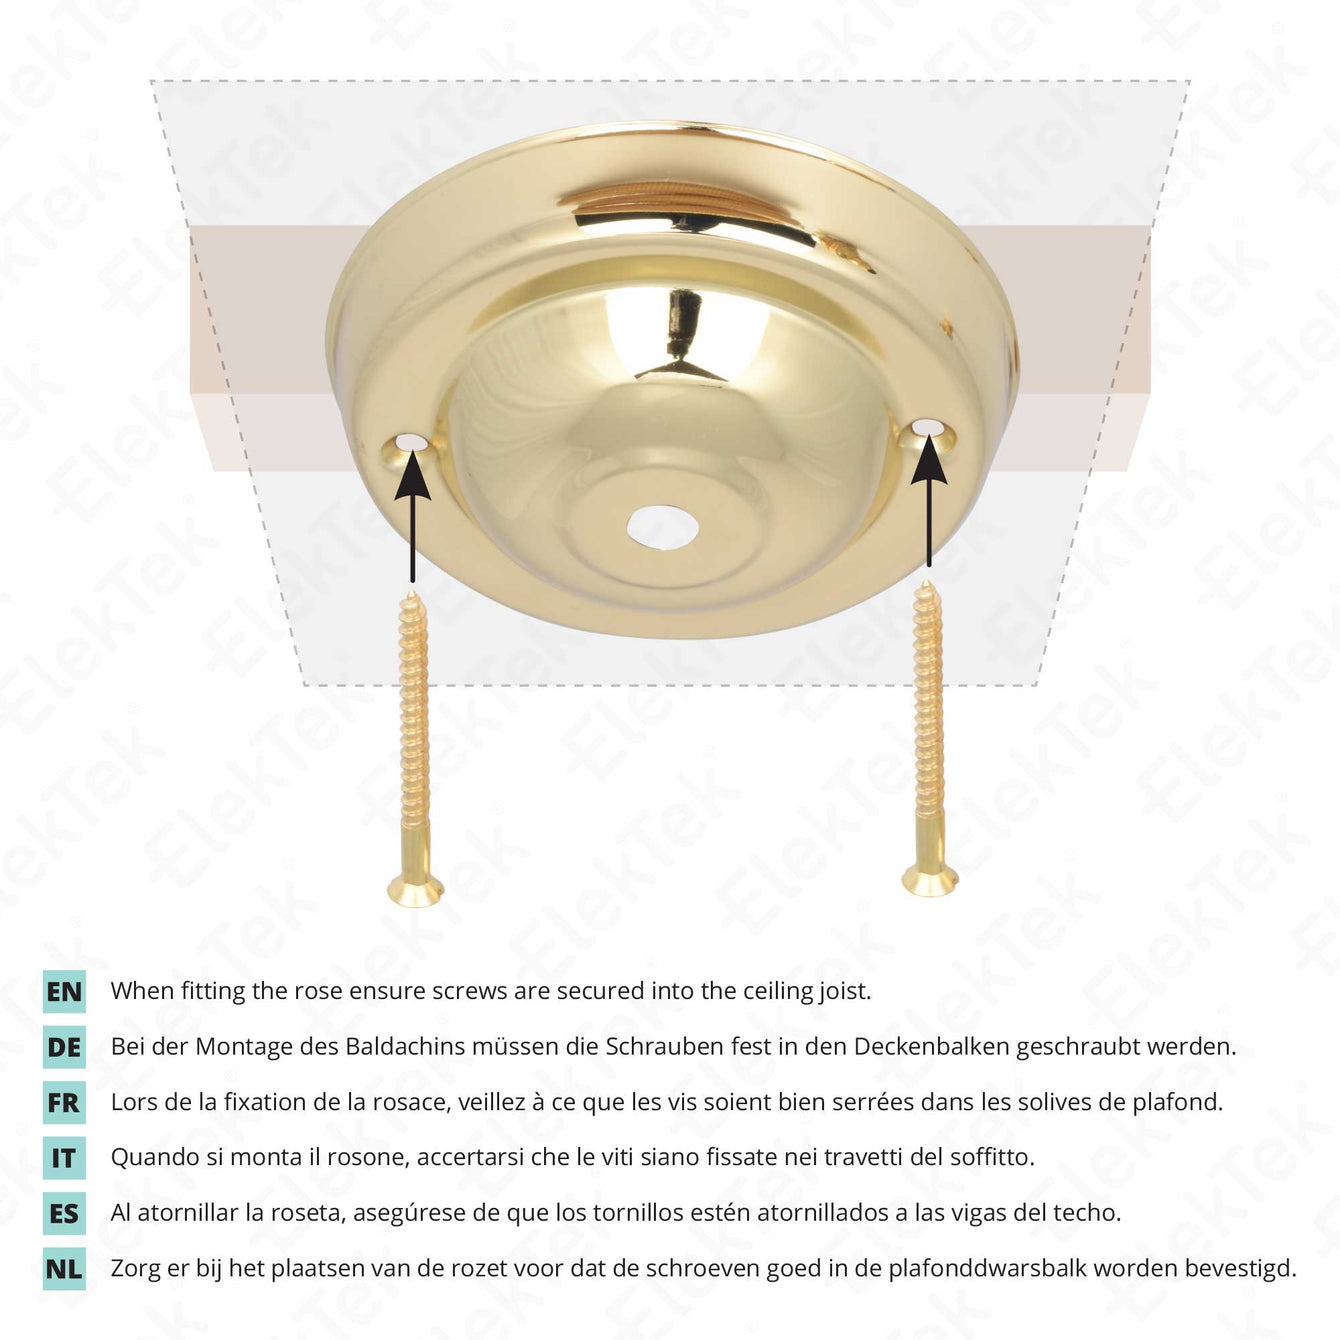 ElekTek 108mm Diameter Ceiling Rose with Hook Metallic Finishes Powder Coated Colours For Light Fittings and Chandeliers Fusion Bronze